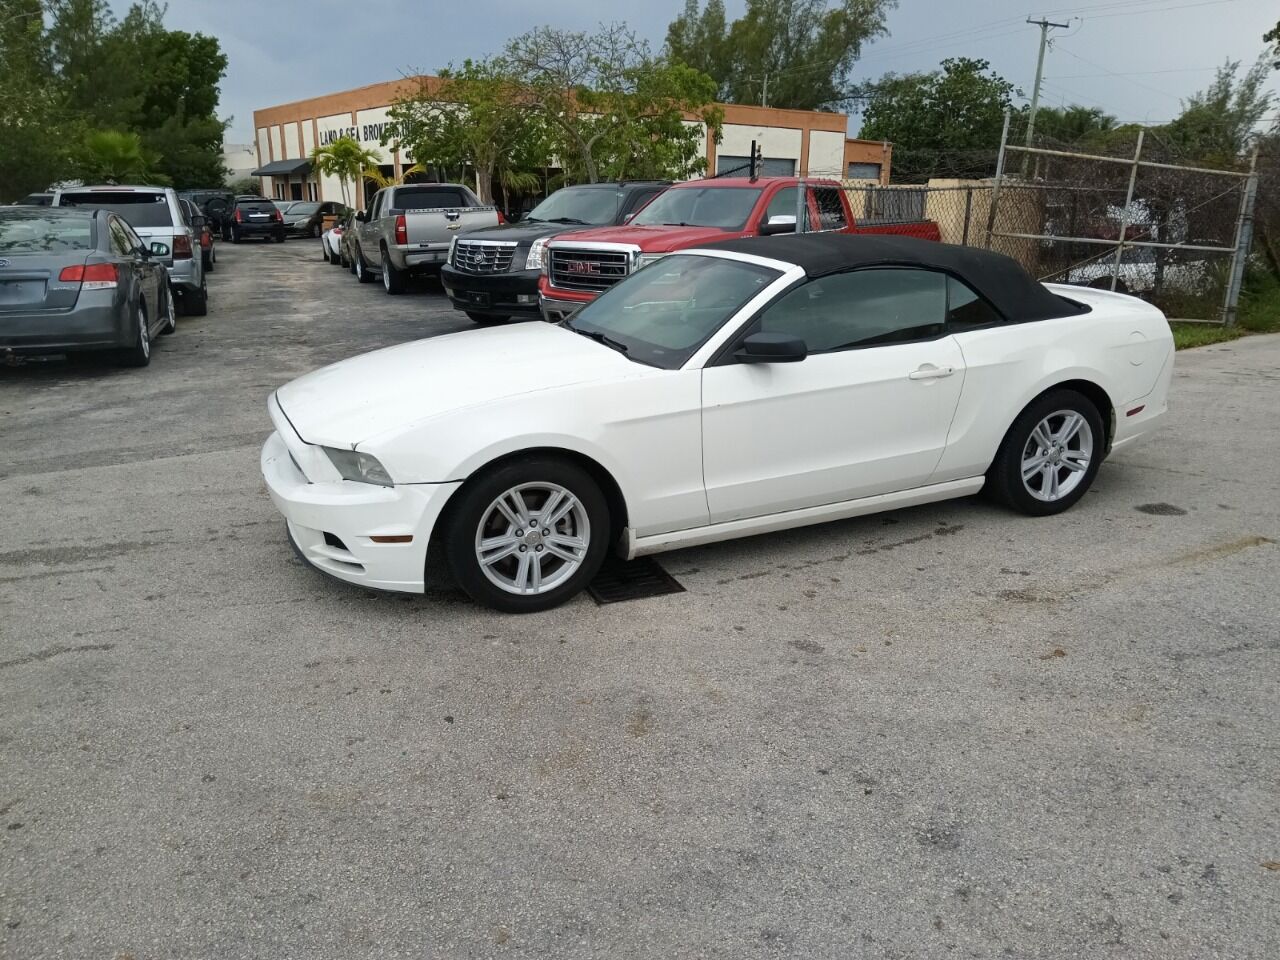 2013 FORD Mustang Convertible - $7,450